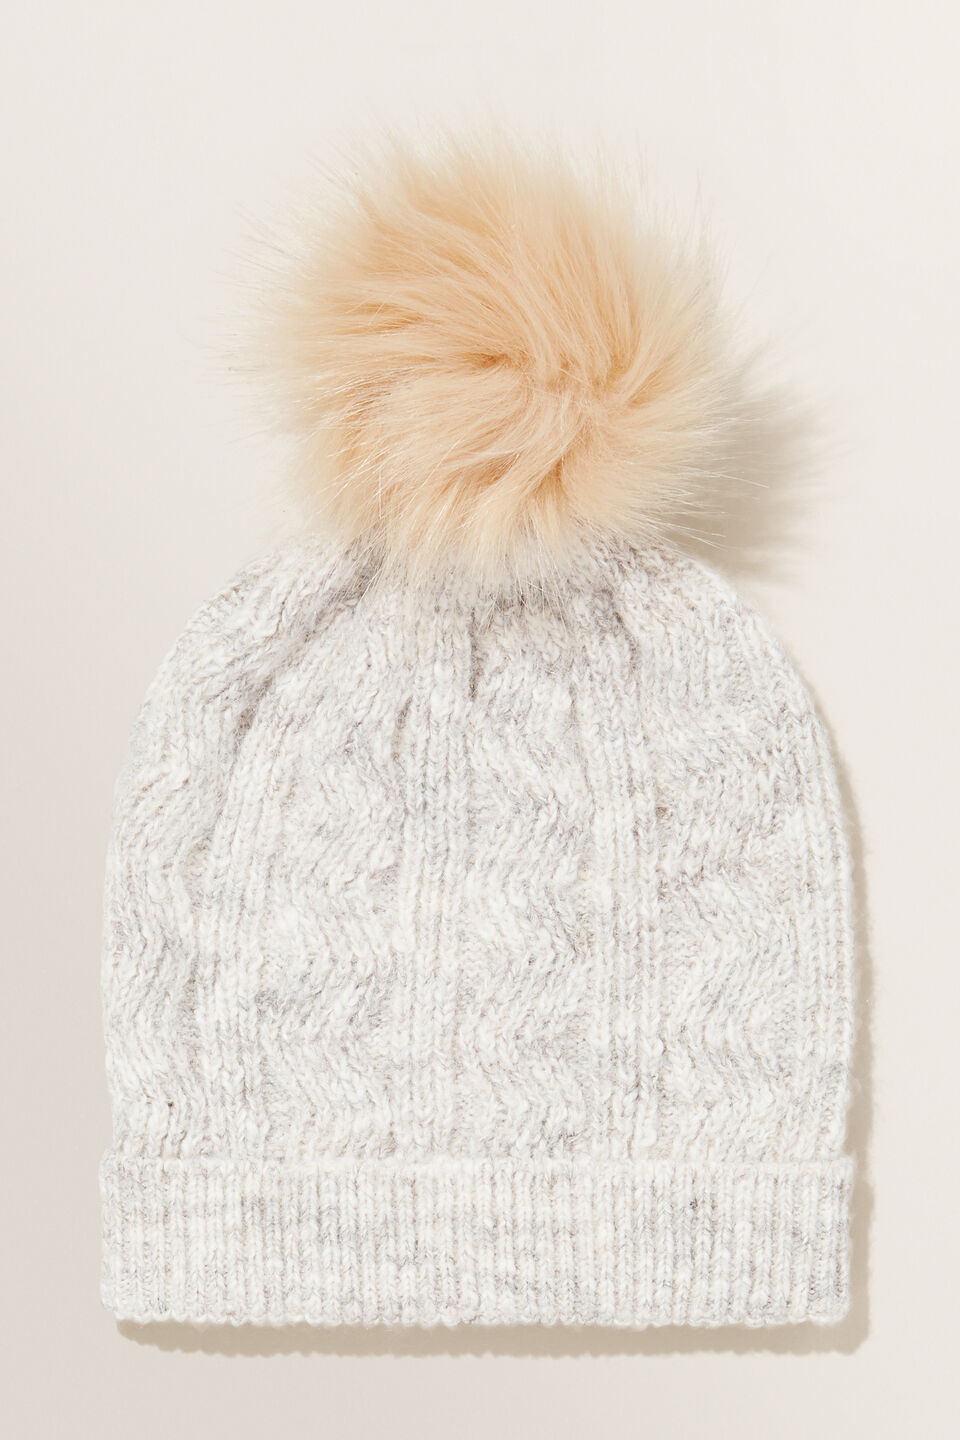 Oat Marle Cable Beanie  Oat Marle